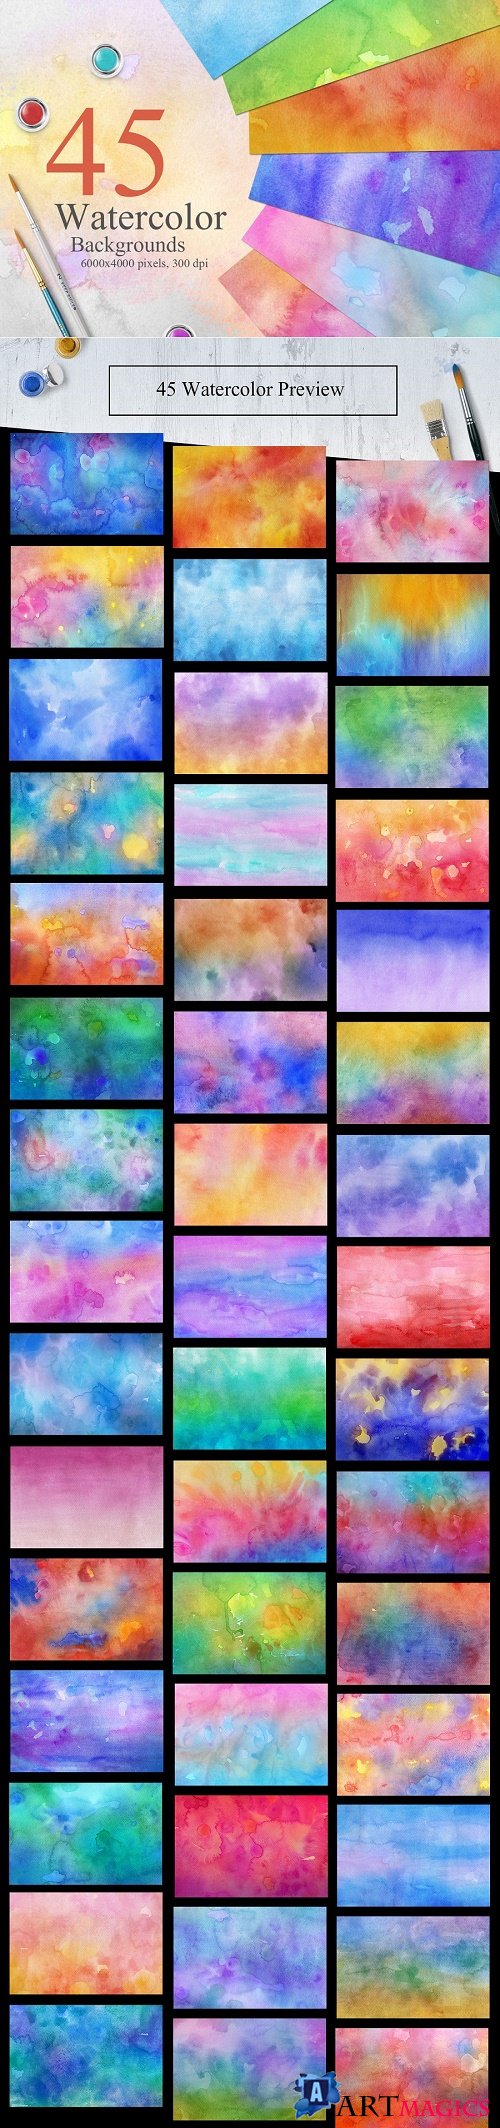 45 Watercolor Backgrounds - 2269084